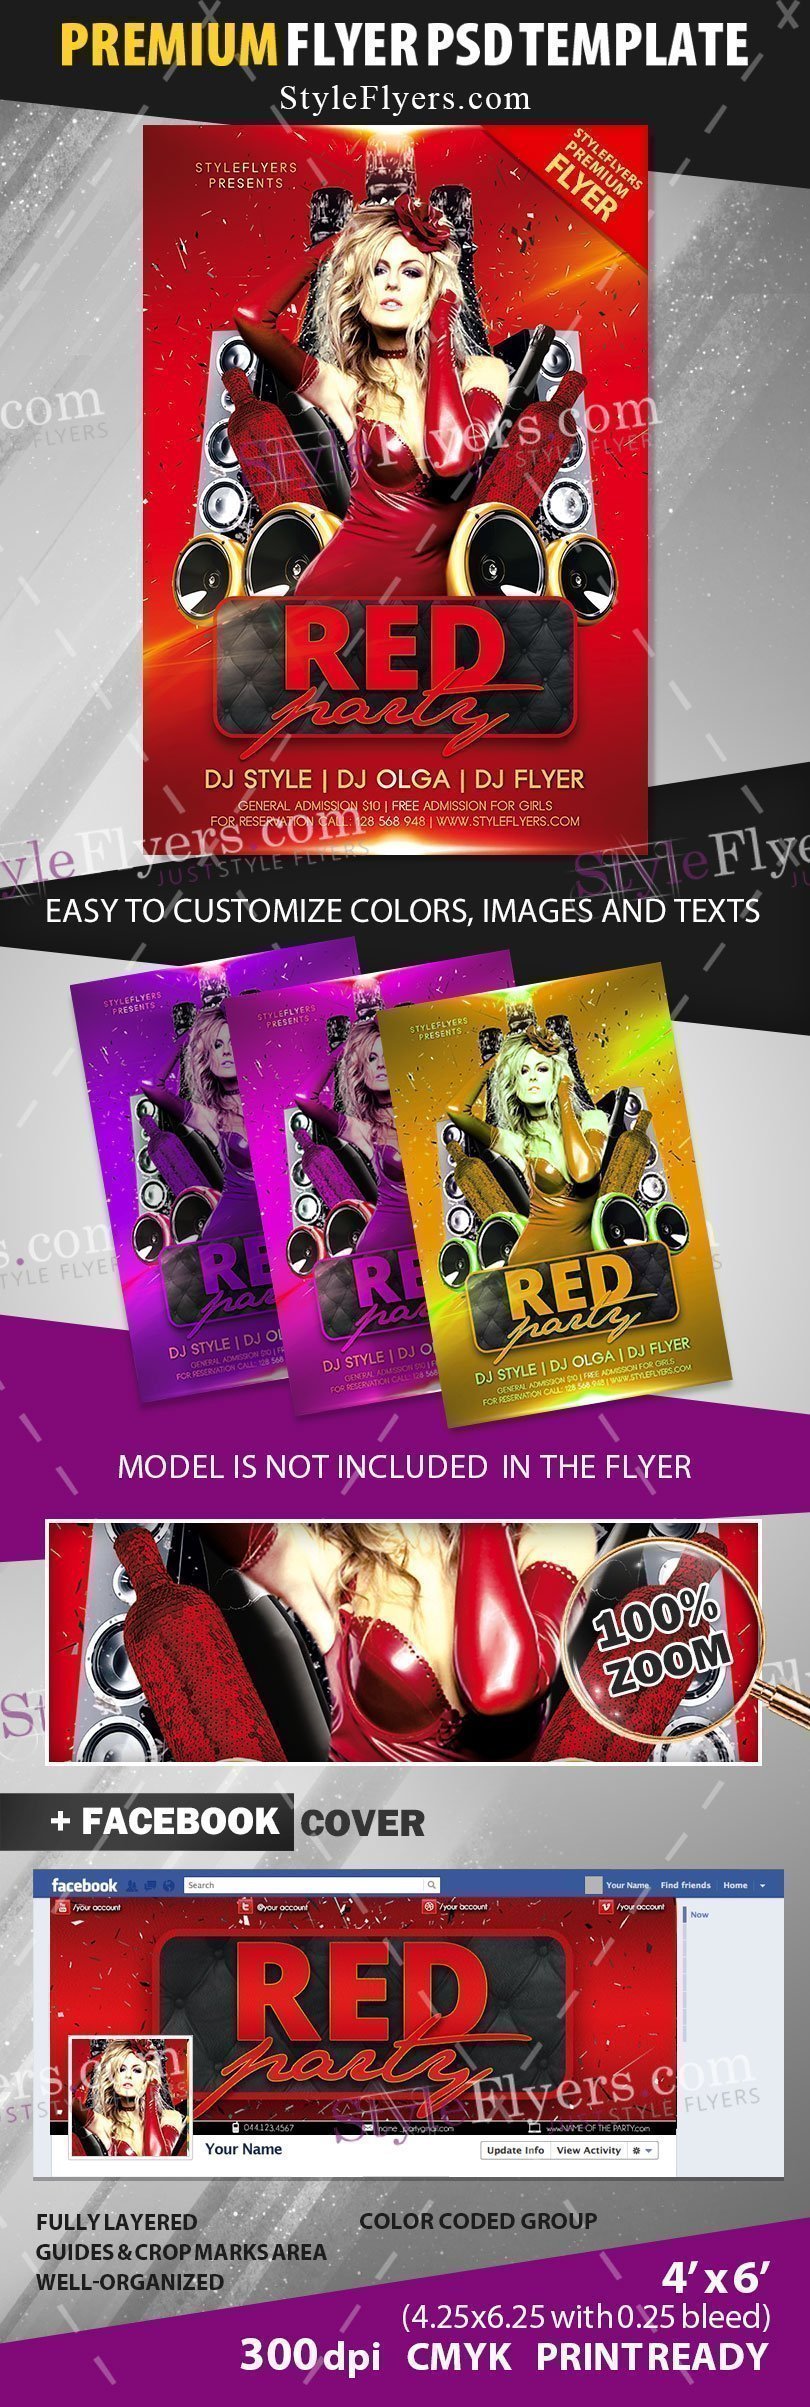 preview_red_party_premium_template